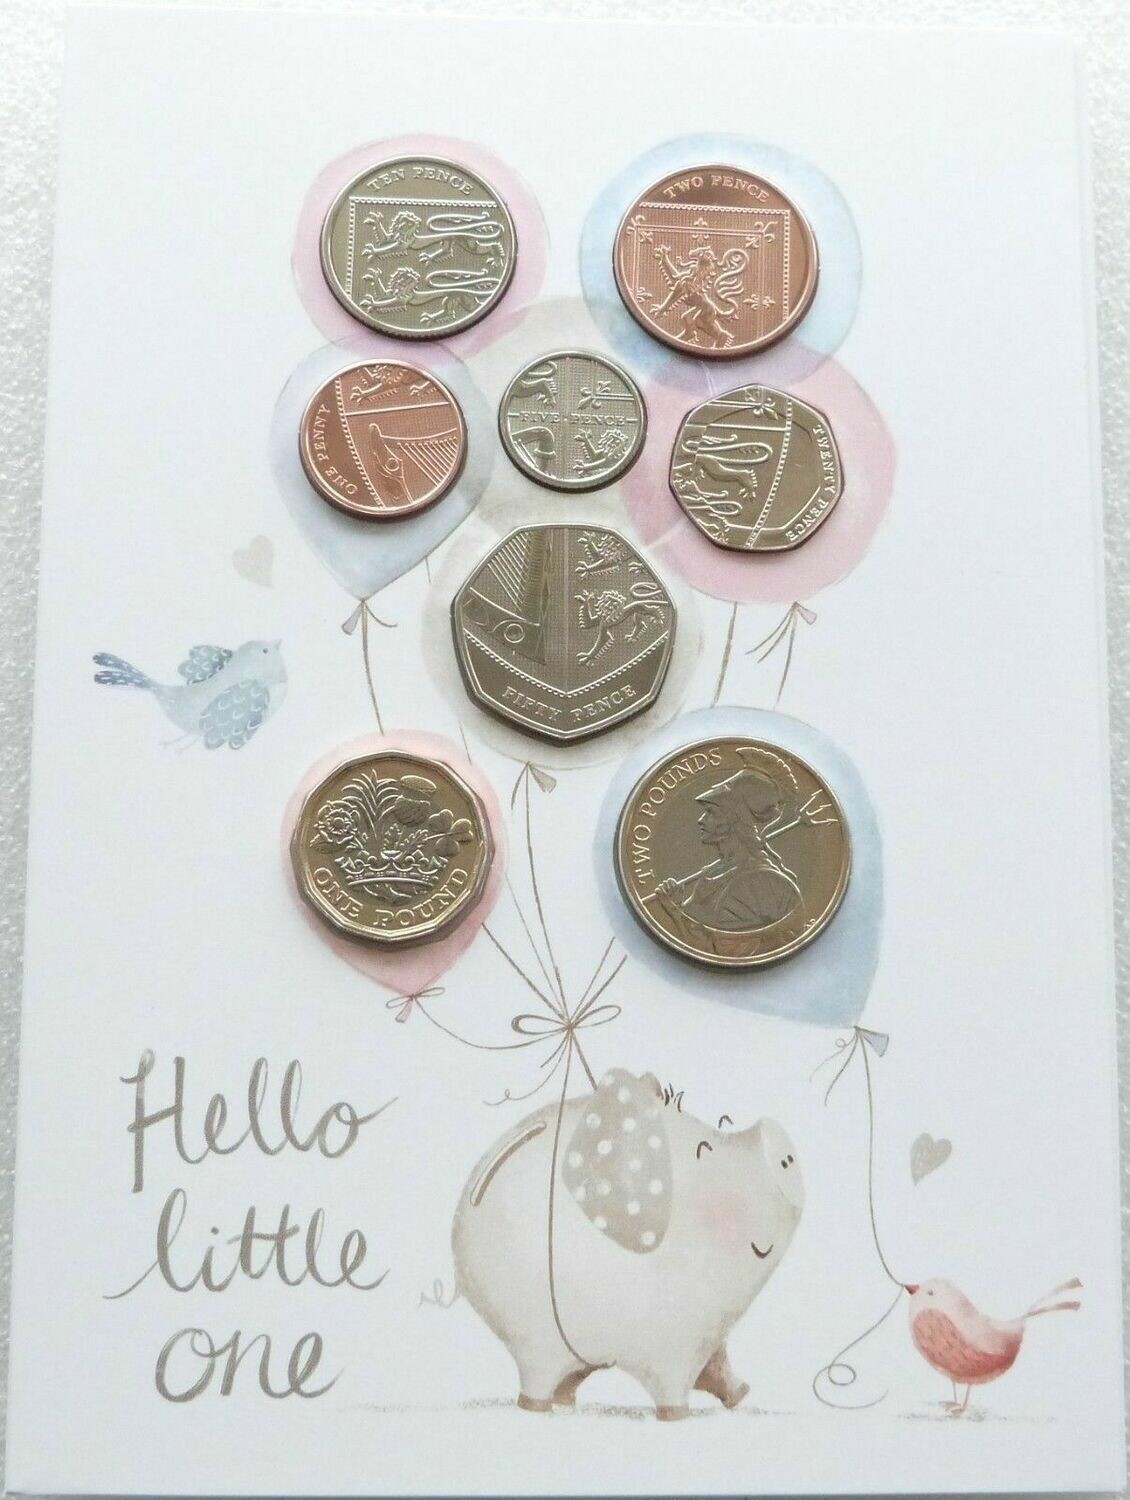 Prospect Stamps and Coins - Baby Proof and Mint Sets